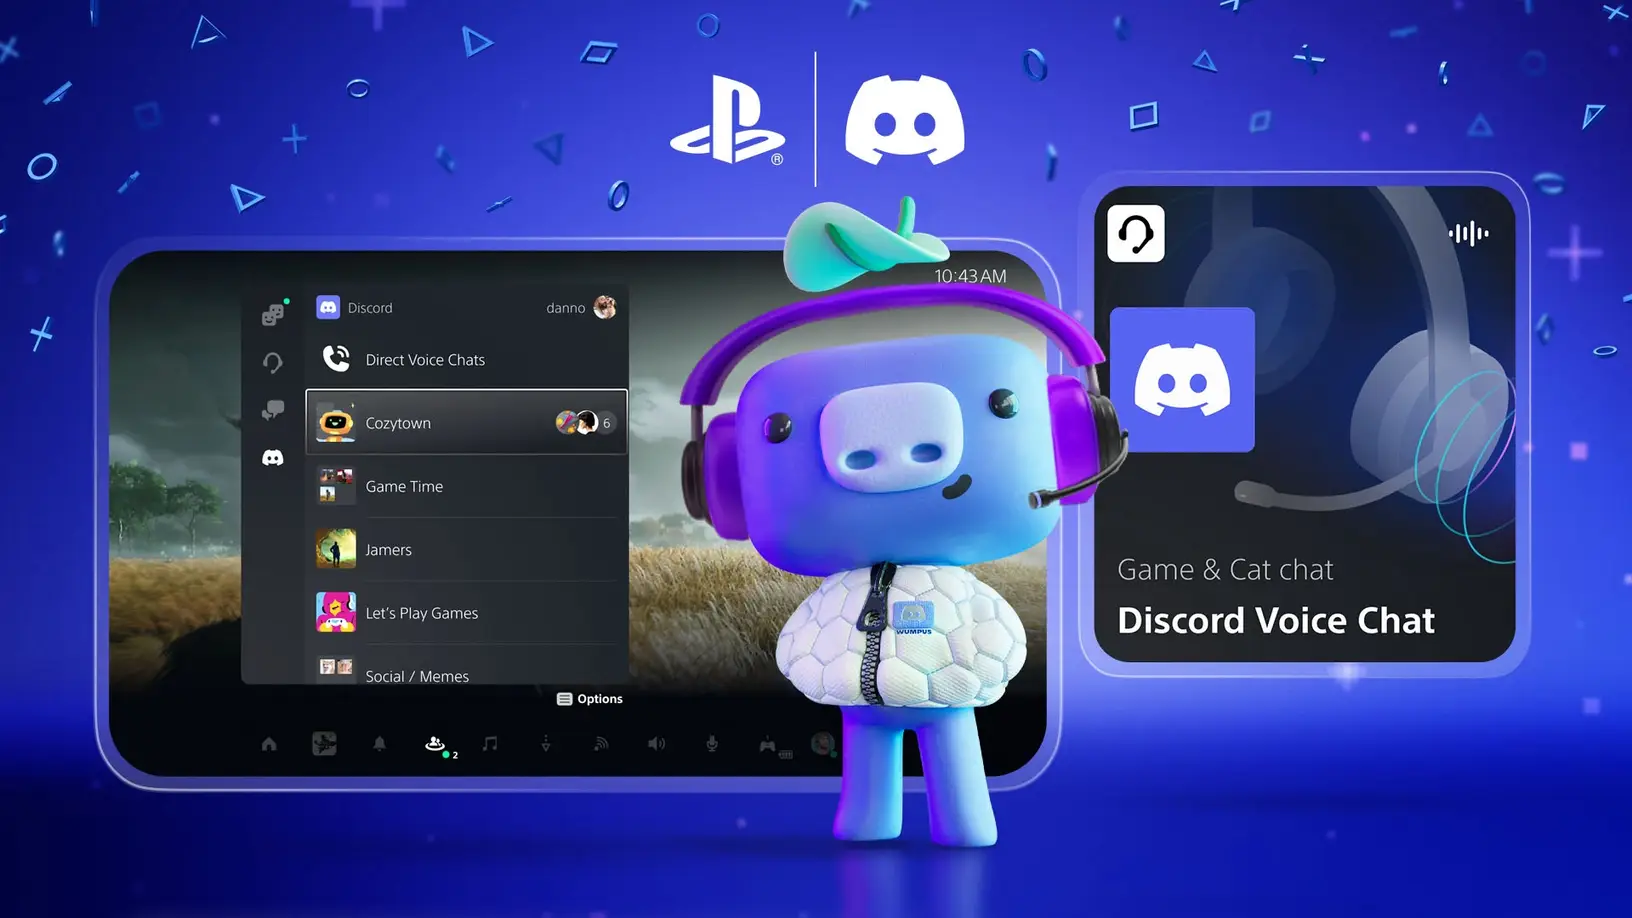 PS5 Players Can Soon Join Discord Calls Directly from Console